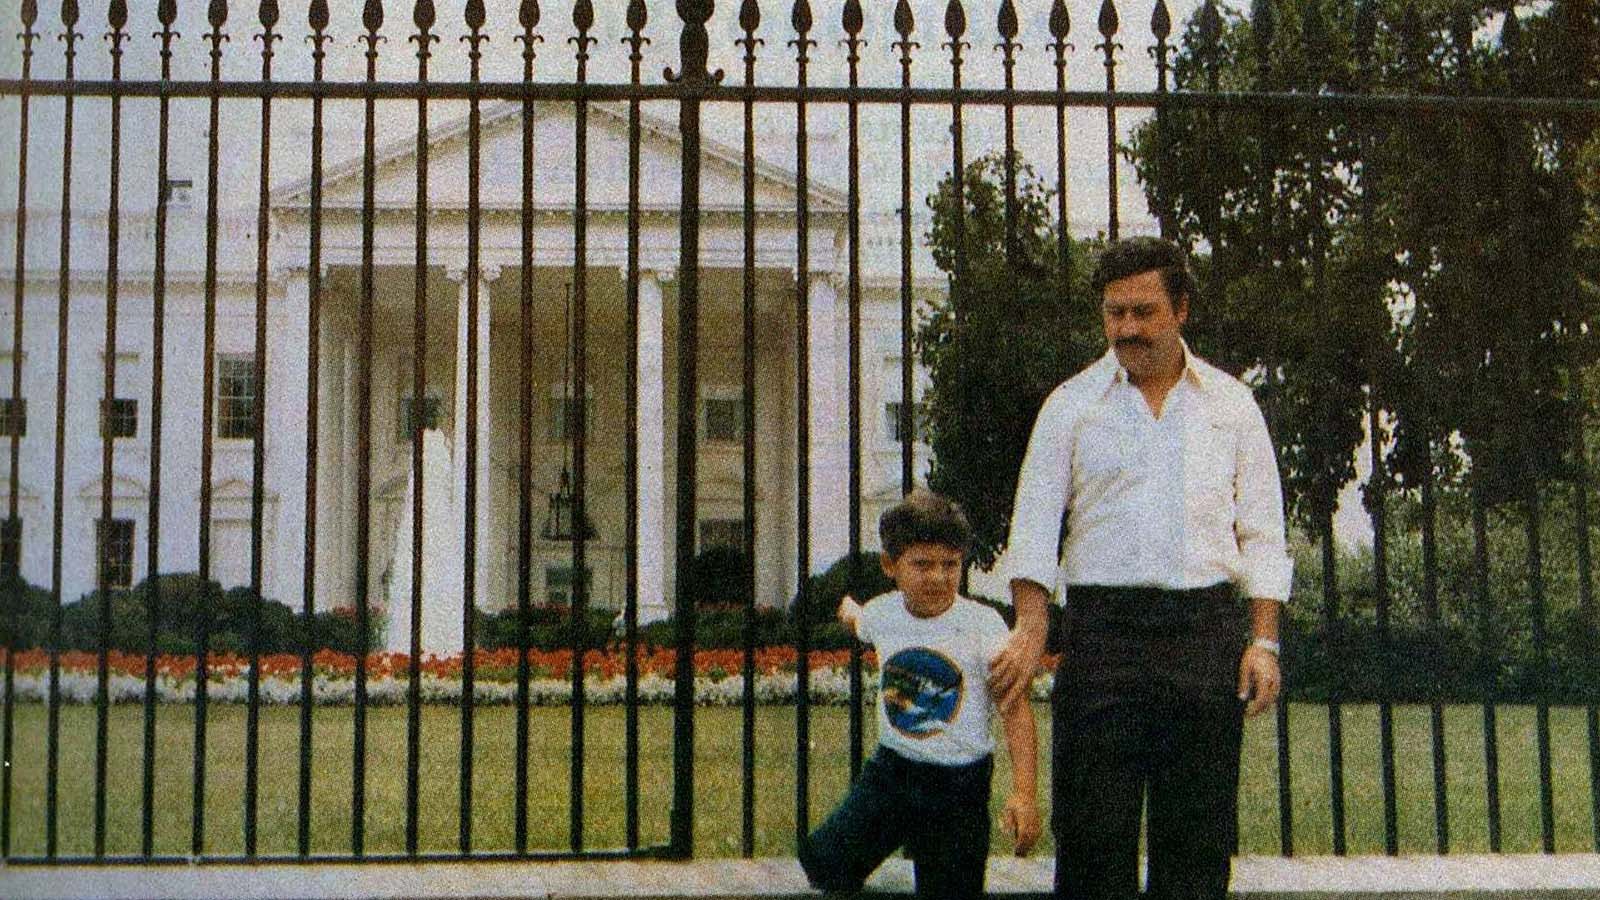 When a Drug Lord Visited the White House: The Shocking Story Behind Pablo Escobar's Photo